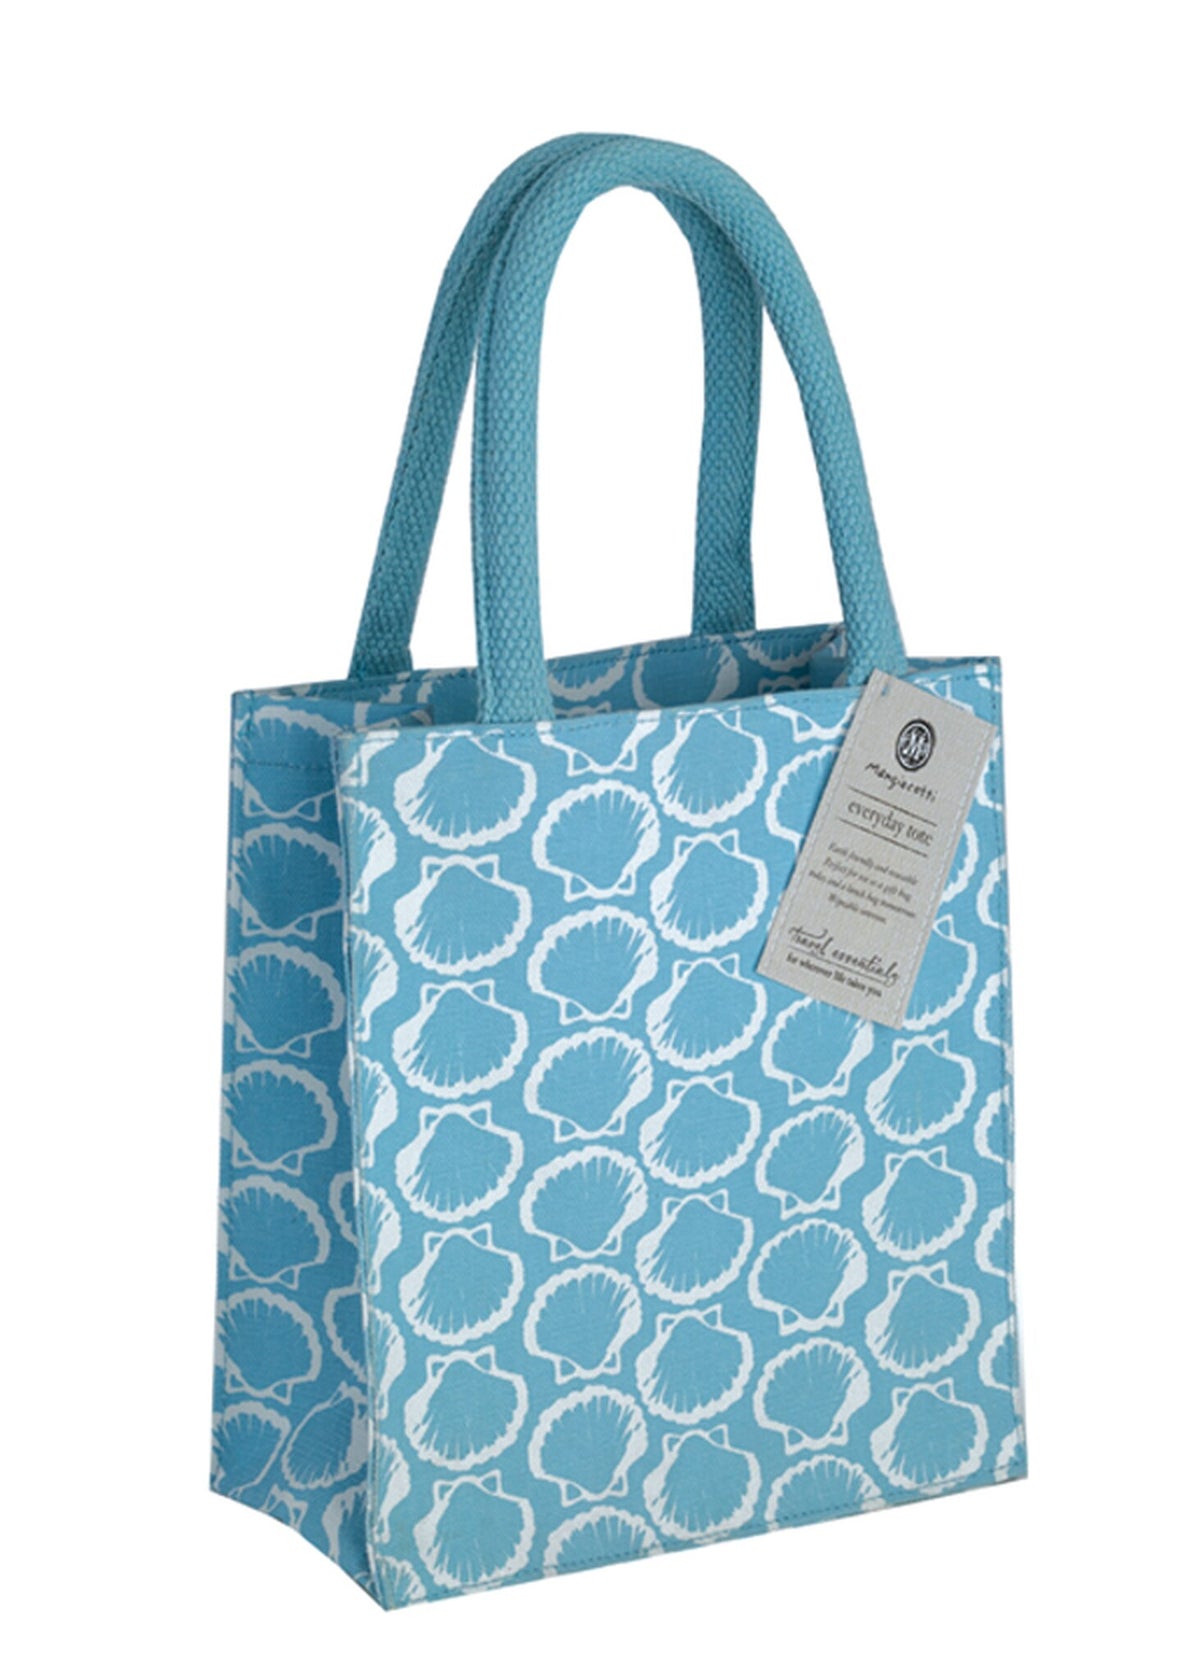 A light blue Mangiacotti Ocean Everyday Tote Bag with a pattern of darker blue tulip shapes, featuring sturdy handles and a visible product tag on the front.